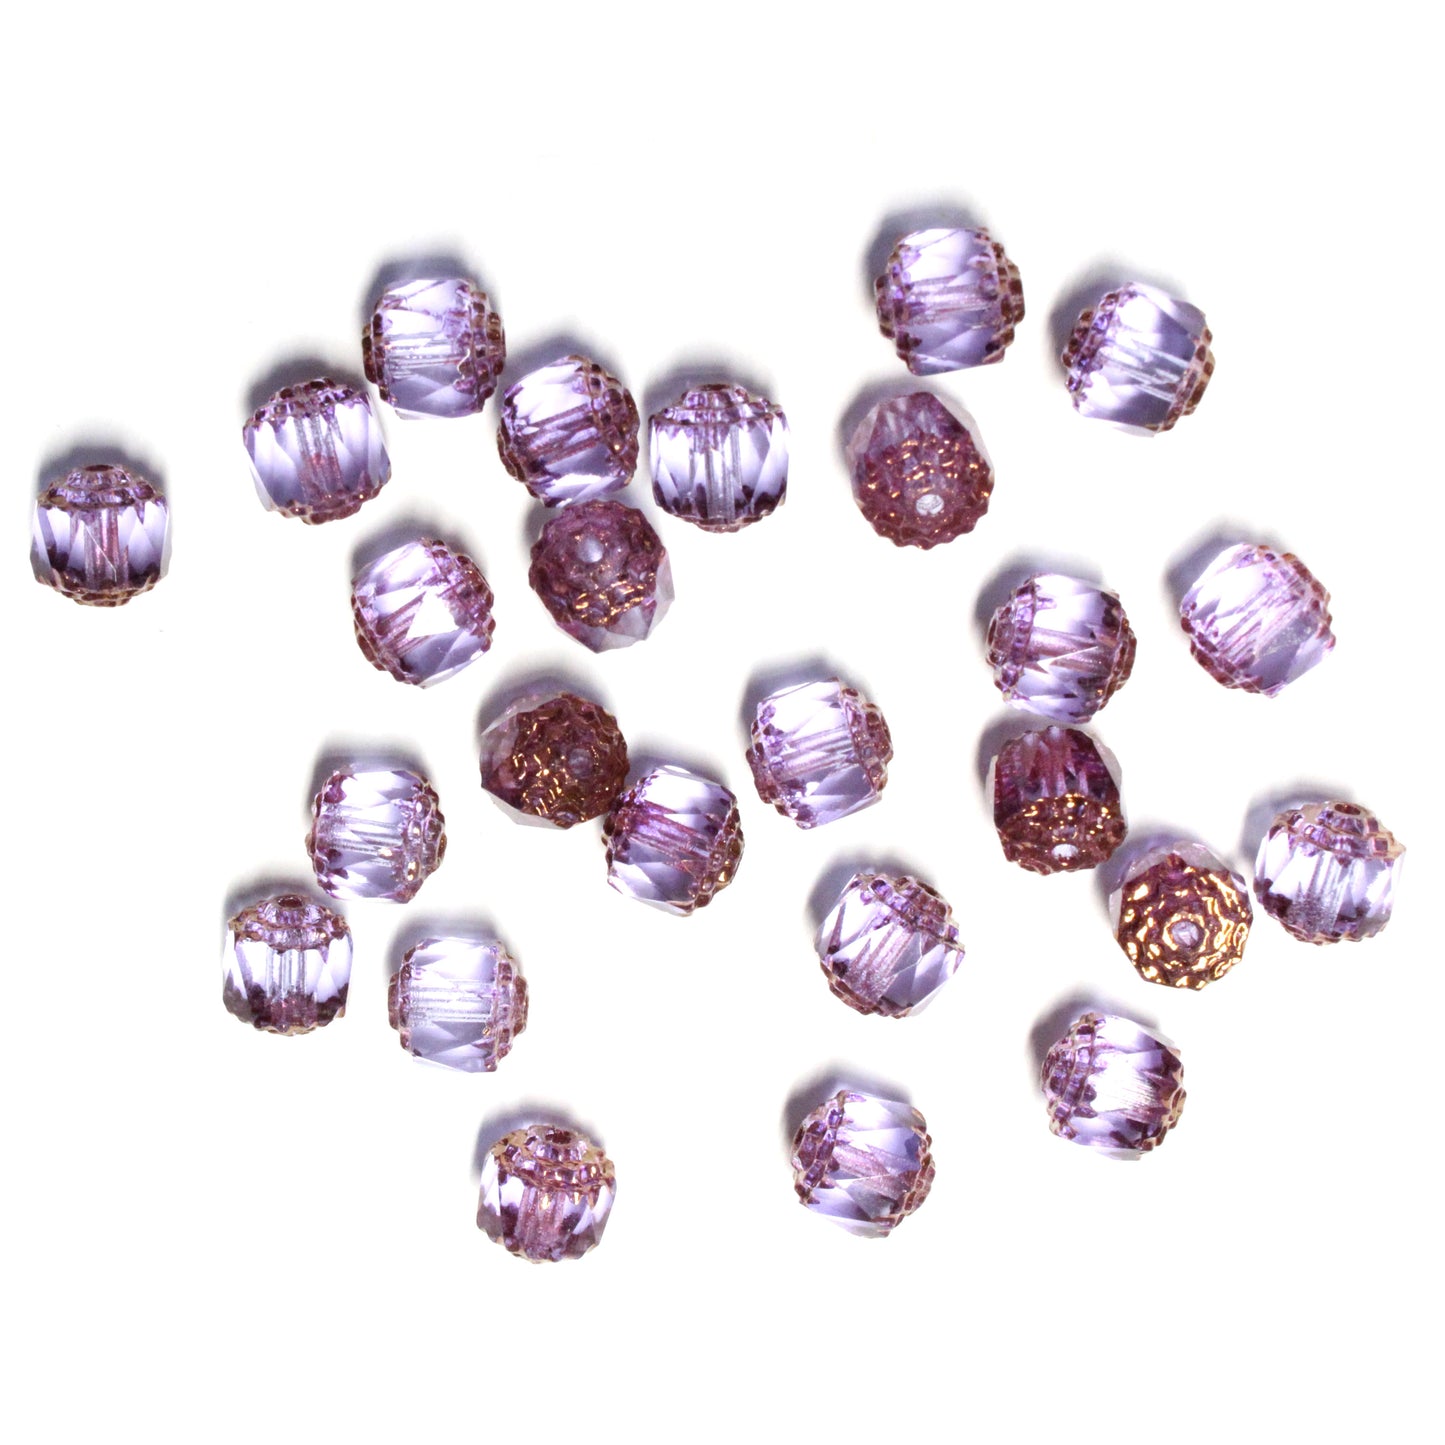 8mm Alexandrite Lantern Beads / Gold Coated Ends / 25 Bead Pack